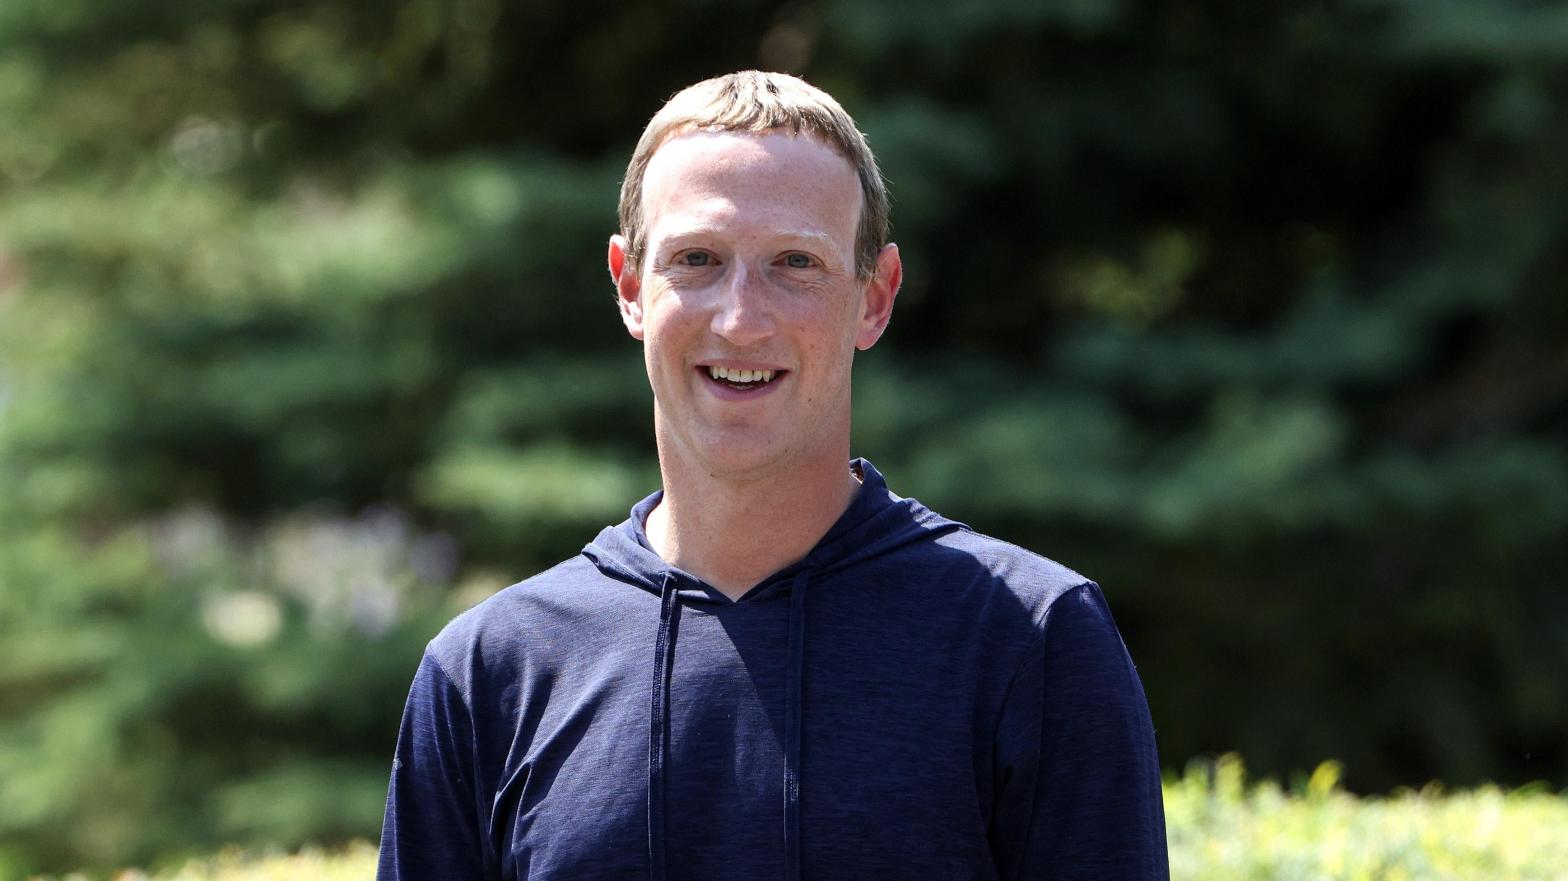 Mark Zuckerberg told investors they are not giving up on the metaverse, but are merging AI tech into its concept of a shared virtual space. (Photo: Kevin Dietsch, Getty Images)